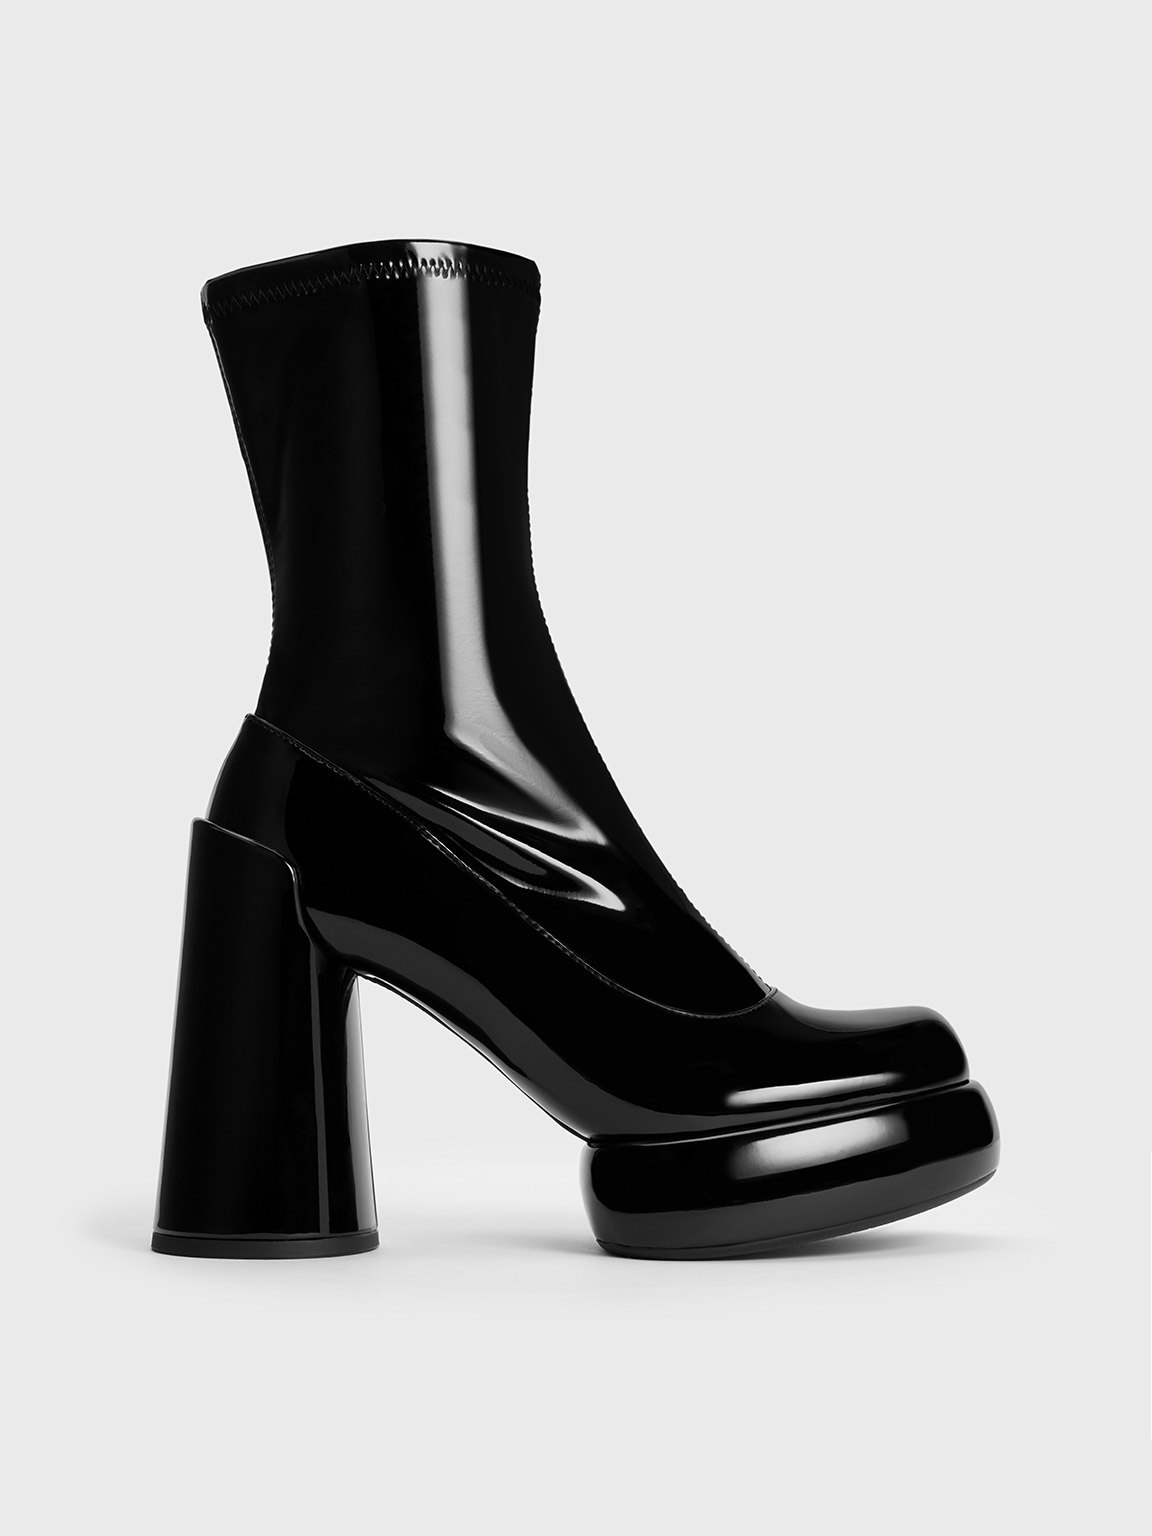 Charles & Keith Darcy Patent Platform Ankle Boots In Black Patent